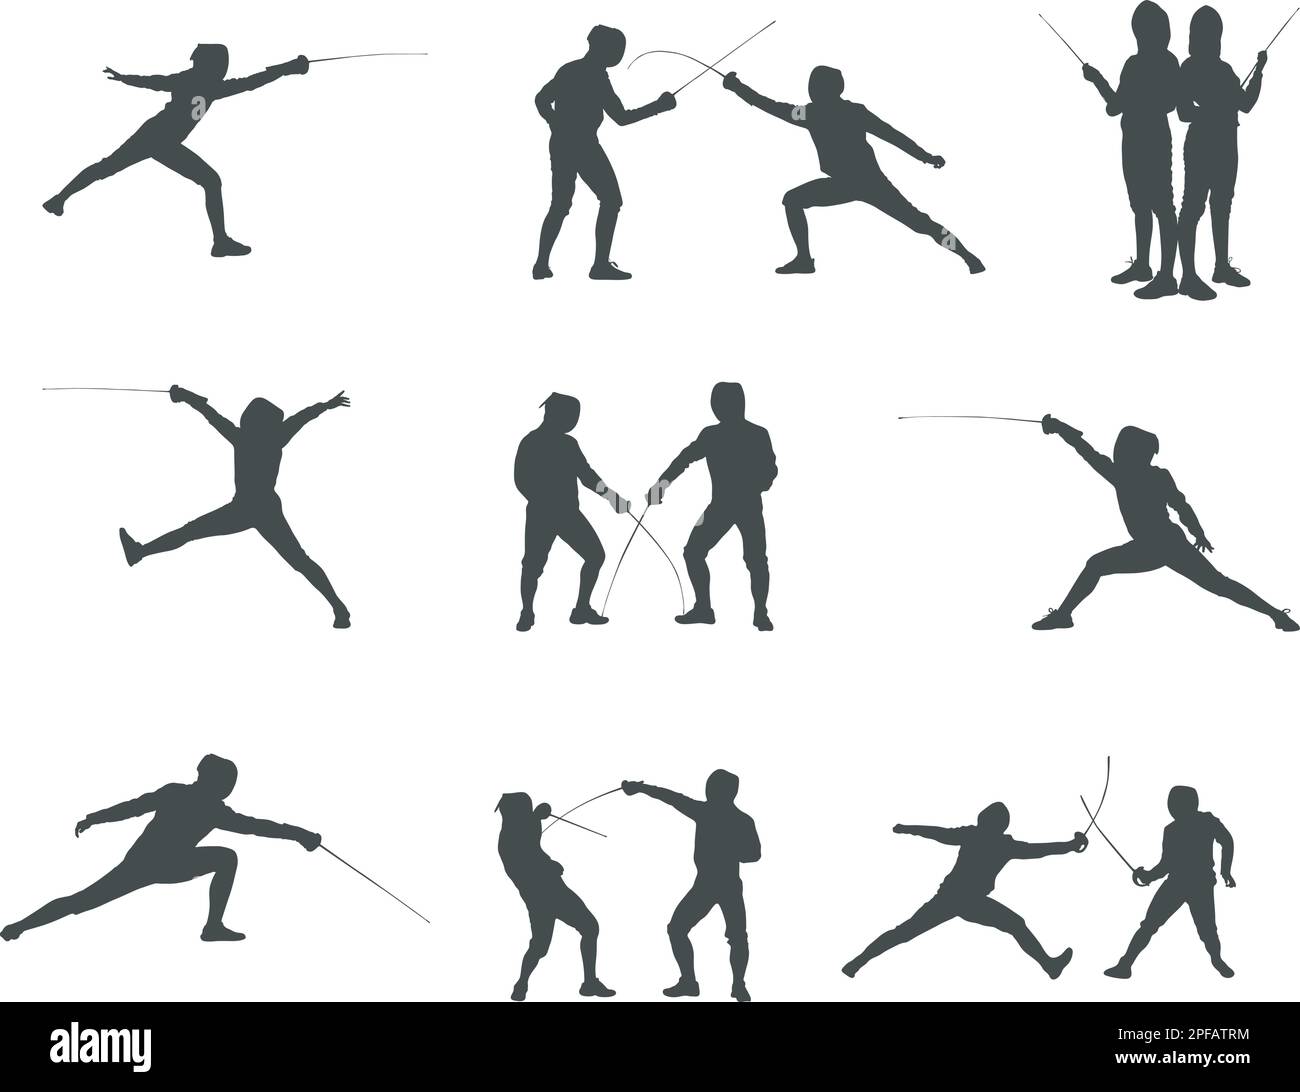 Fencing silhouette, Fencing silhouettes, Fencing players silhouette, Fencing sport Stock Vector